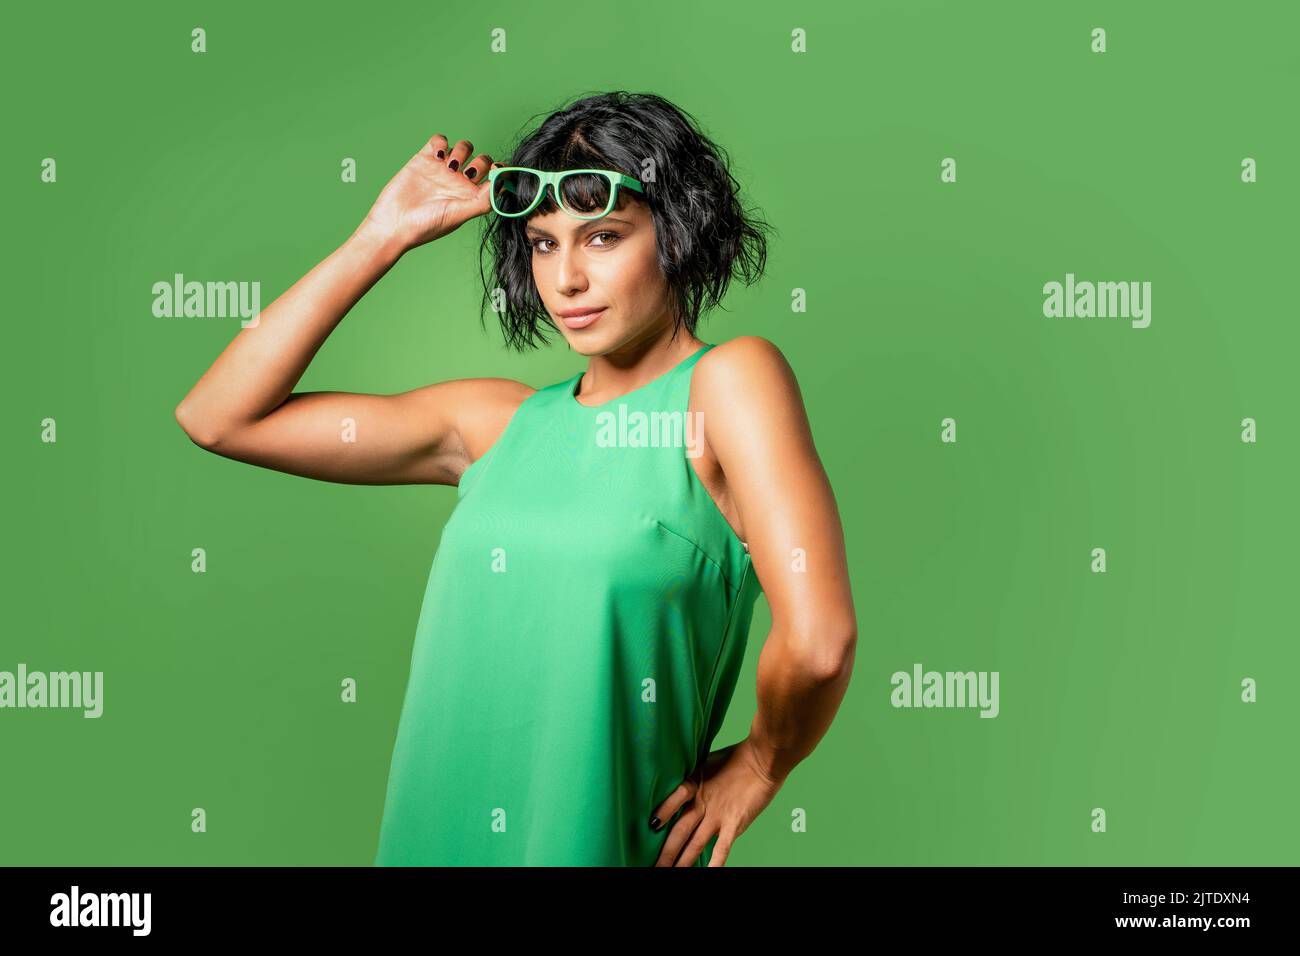 Winking young brunette woman 20s years old wears tank top touching raise sunglasses up - isolated on plain vivid green background - studio portrait - Stock Photo